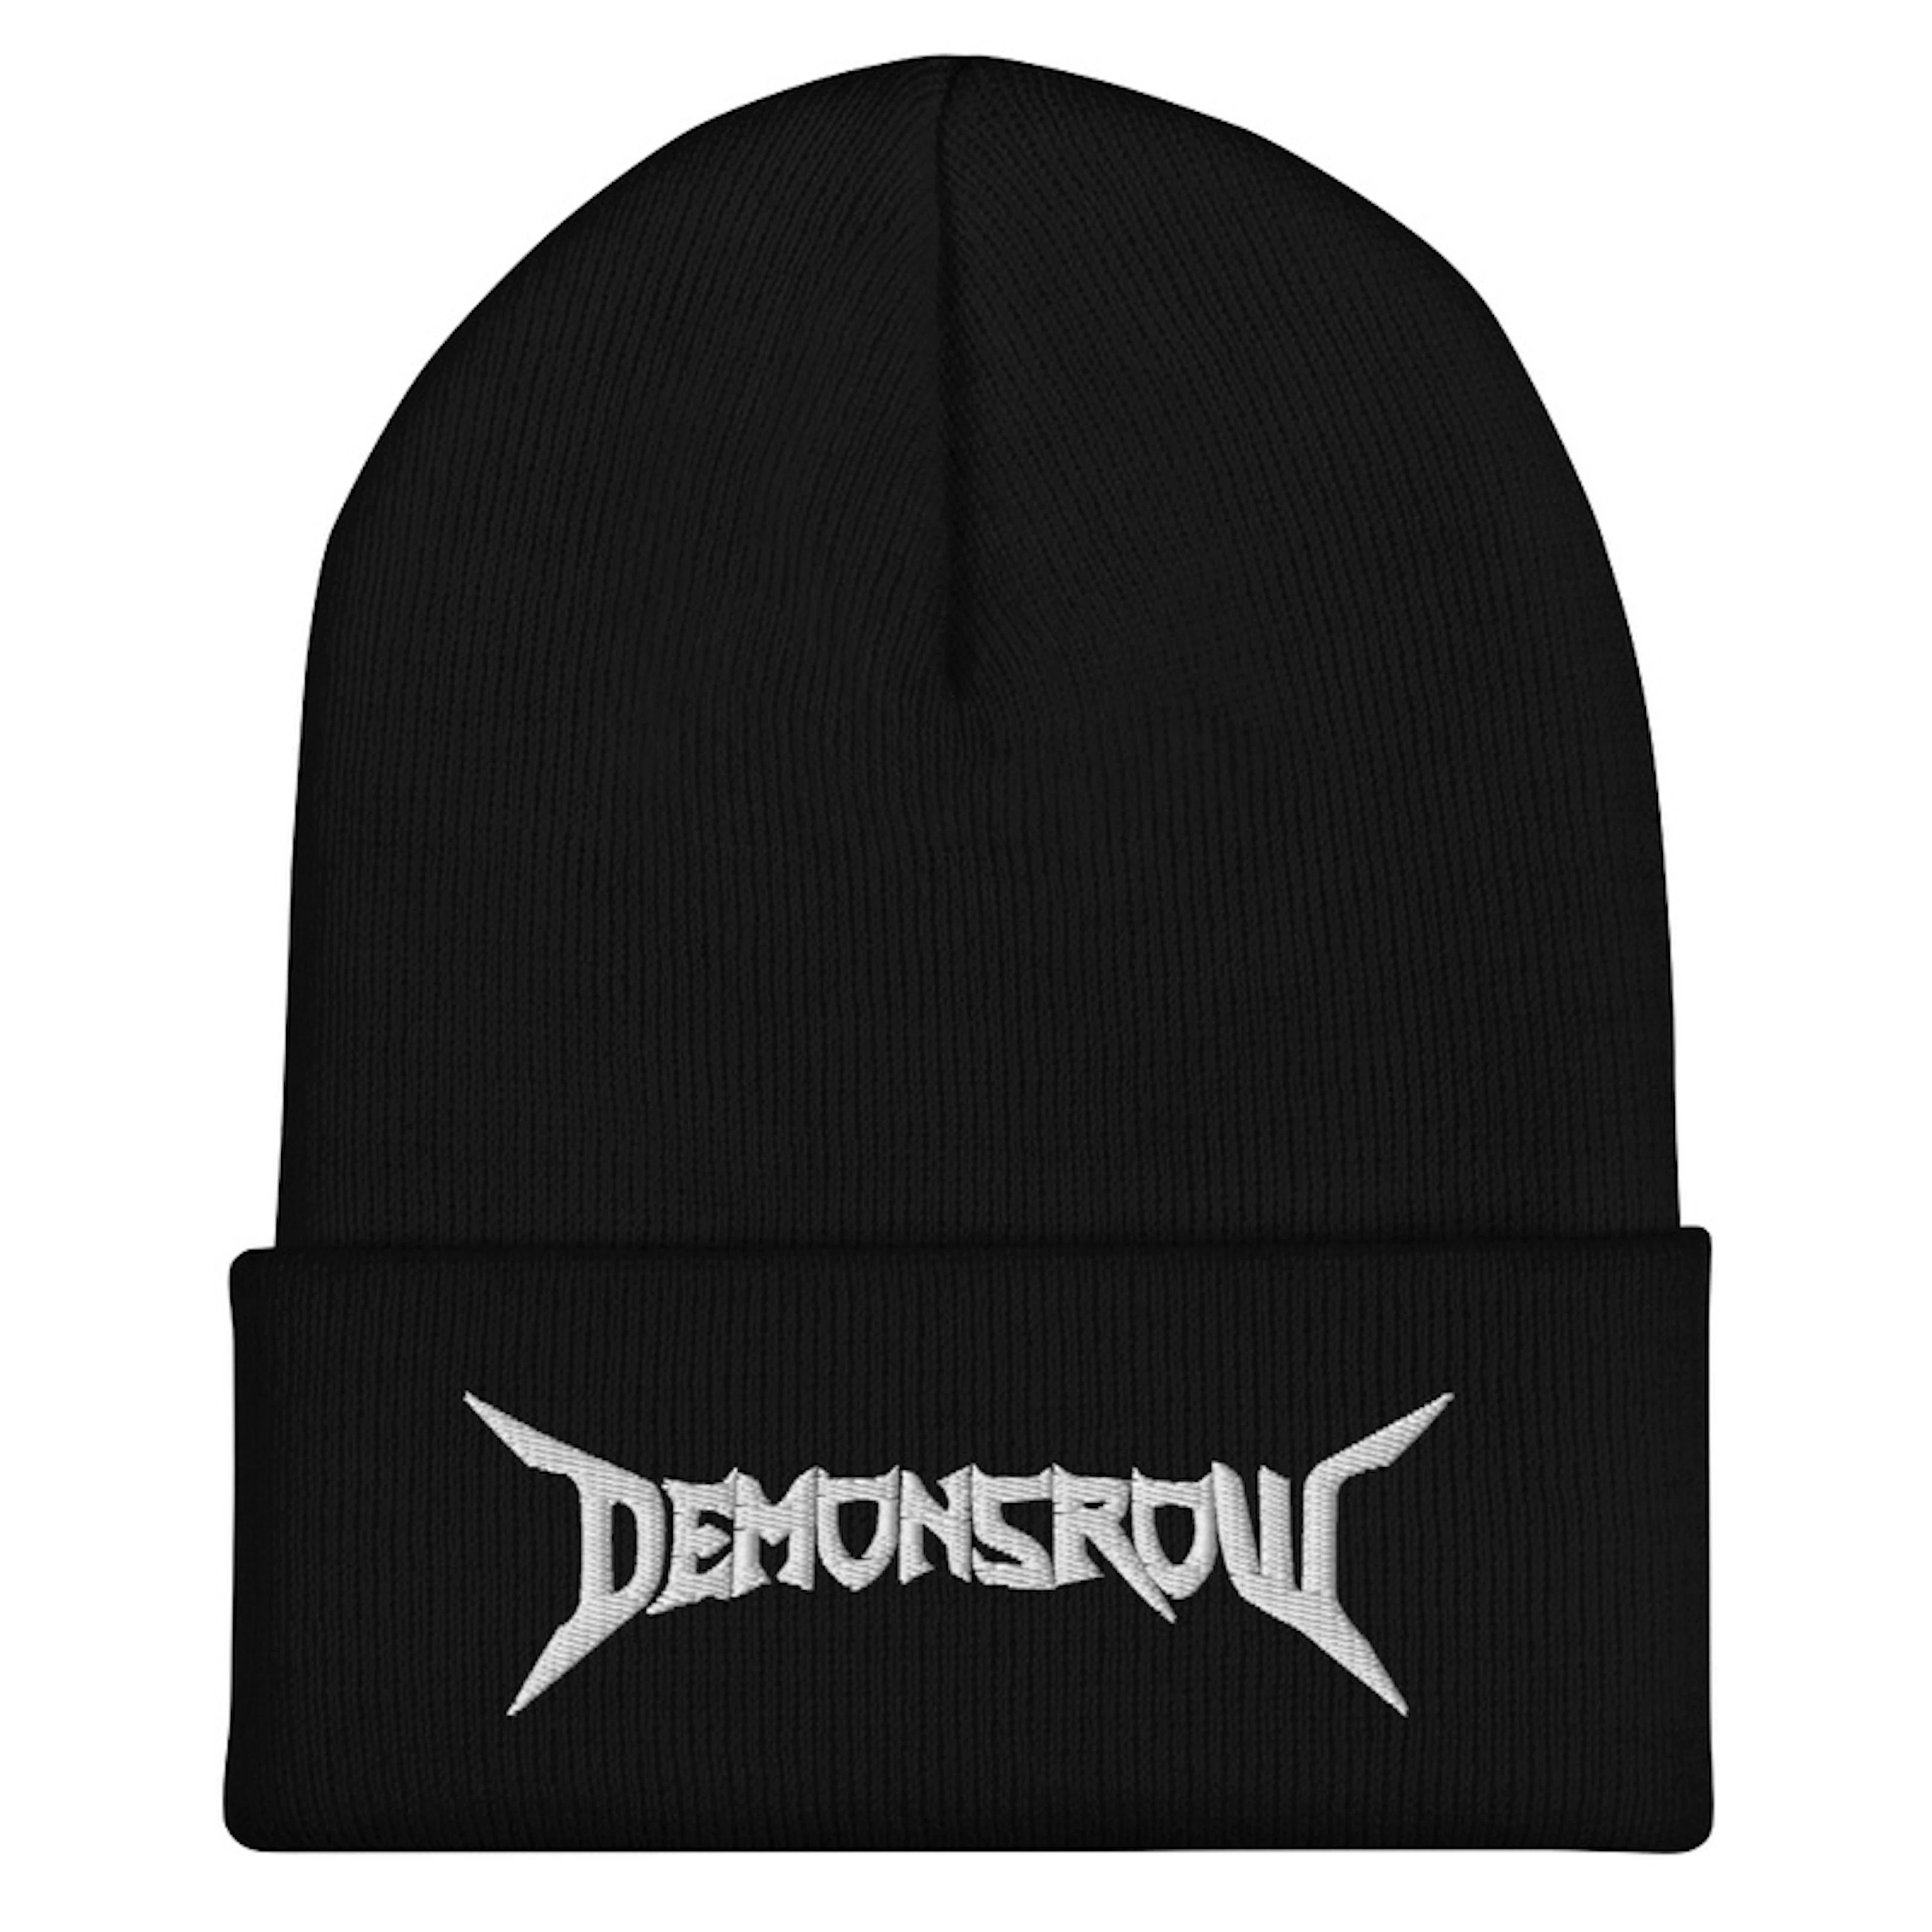 Demons Row Motorcycle Culture Beanie